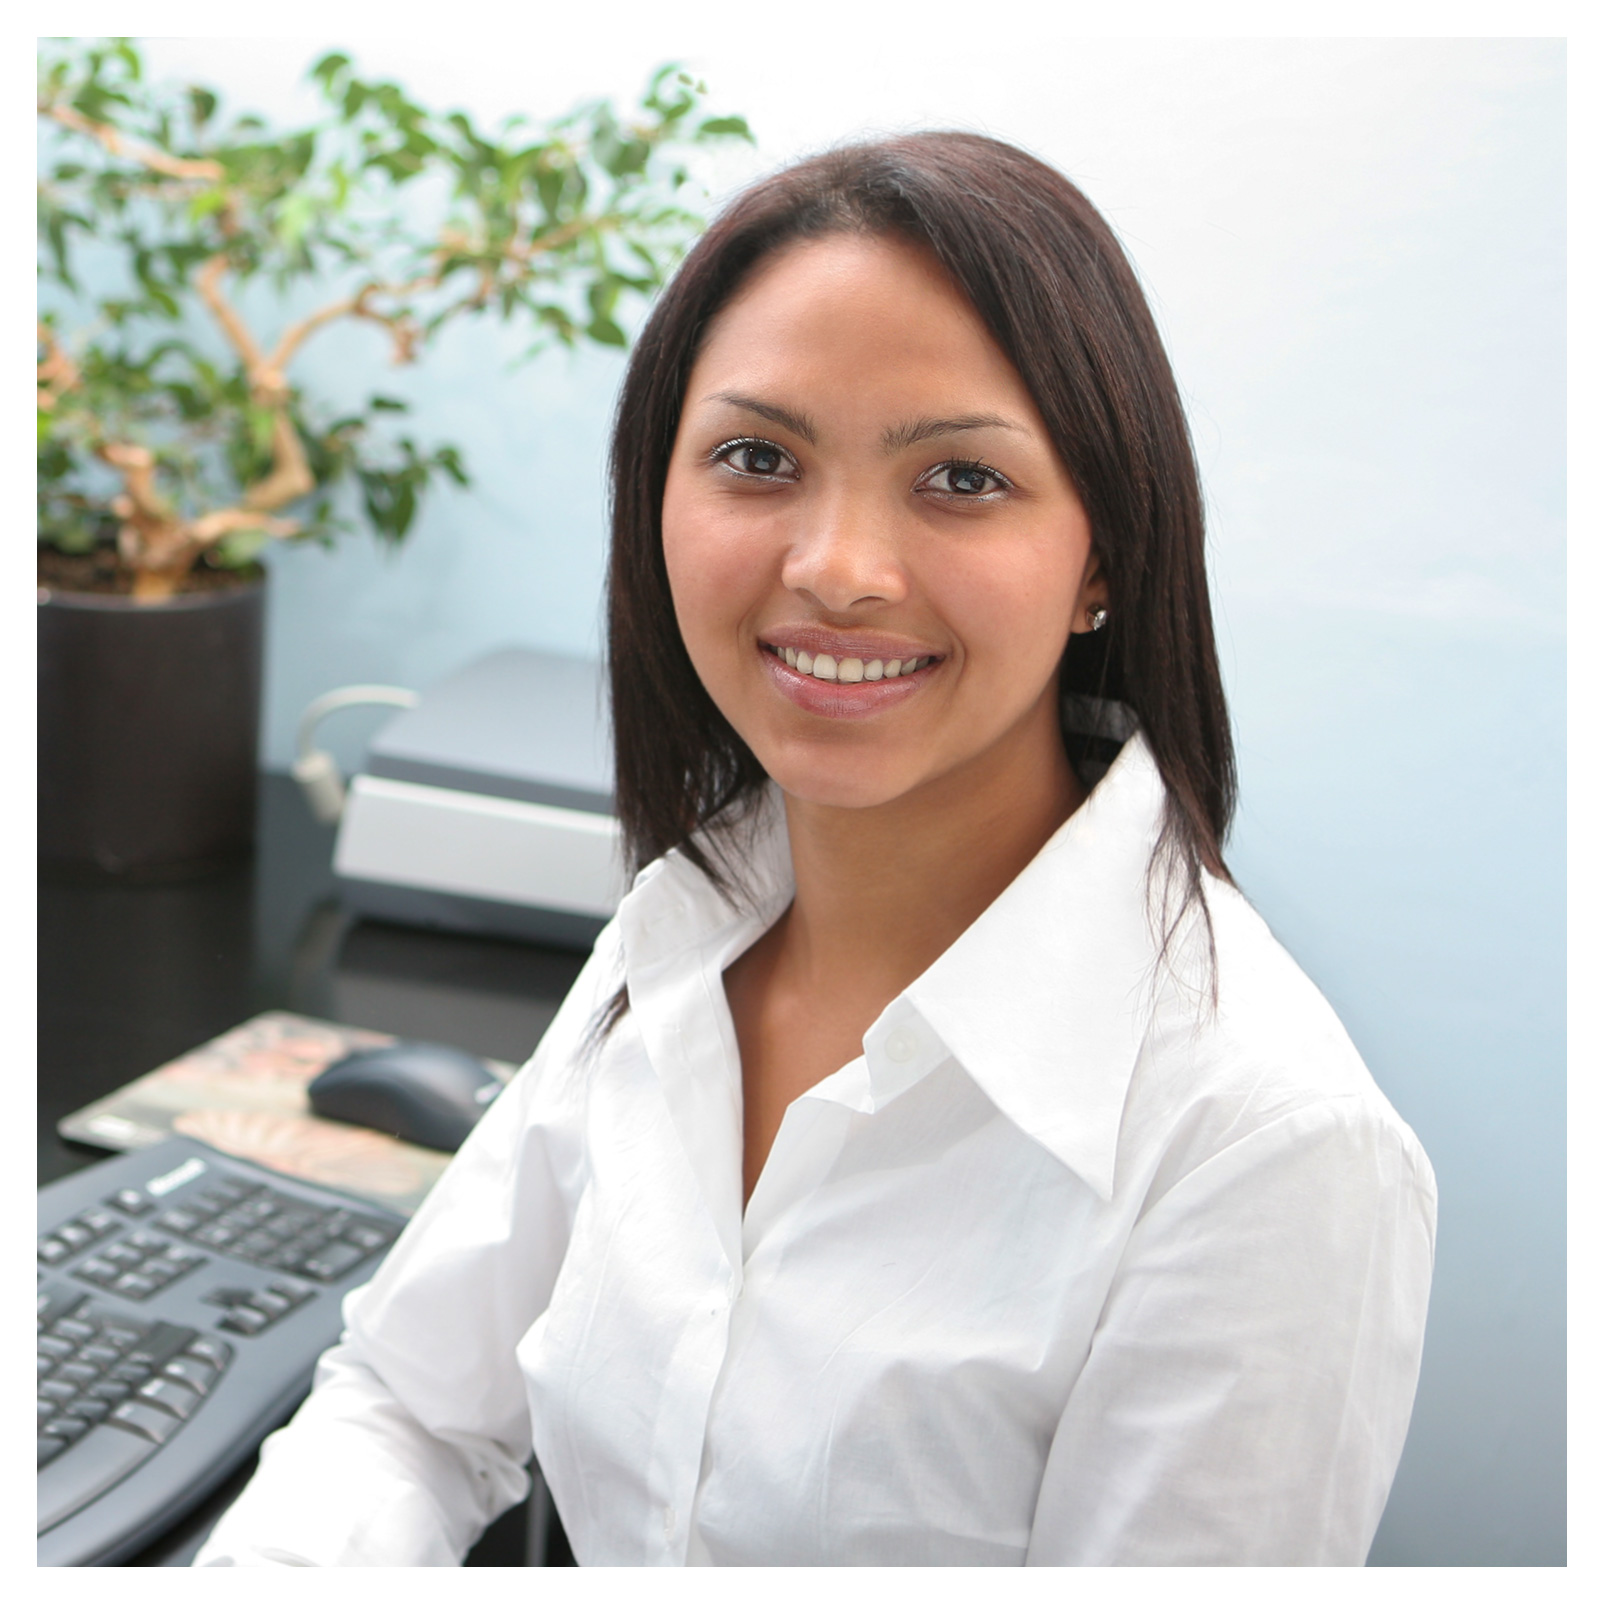 Portrait photography for corporate marketing: Friendly receptionist